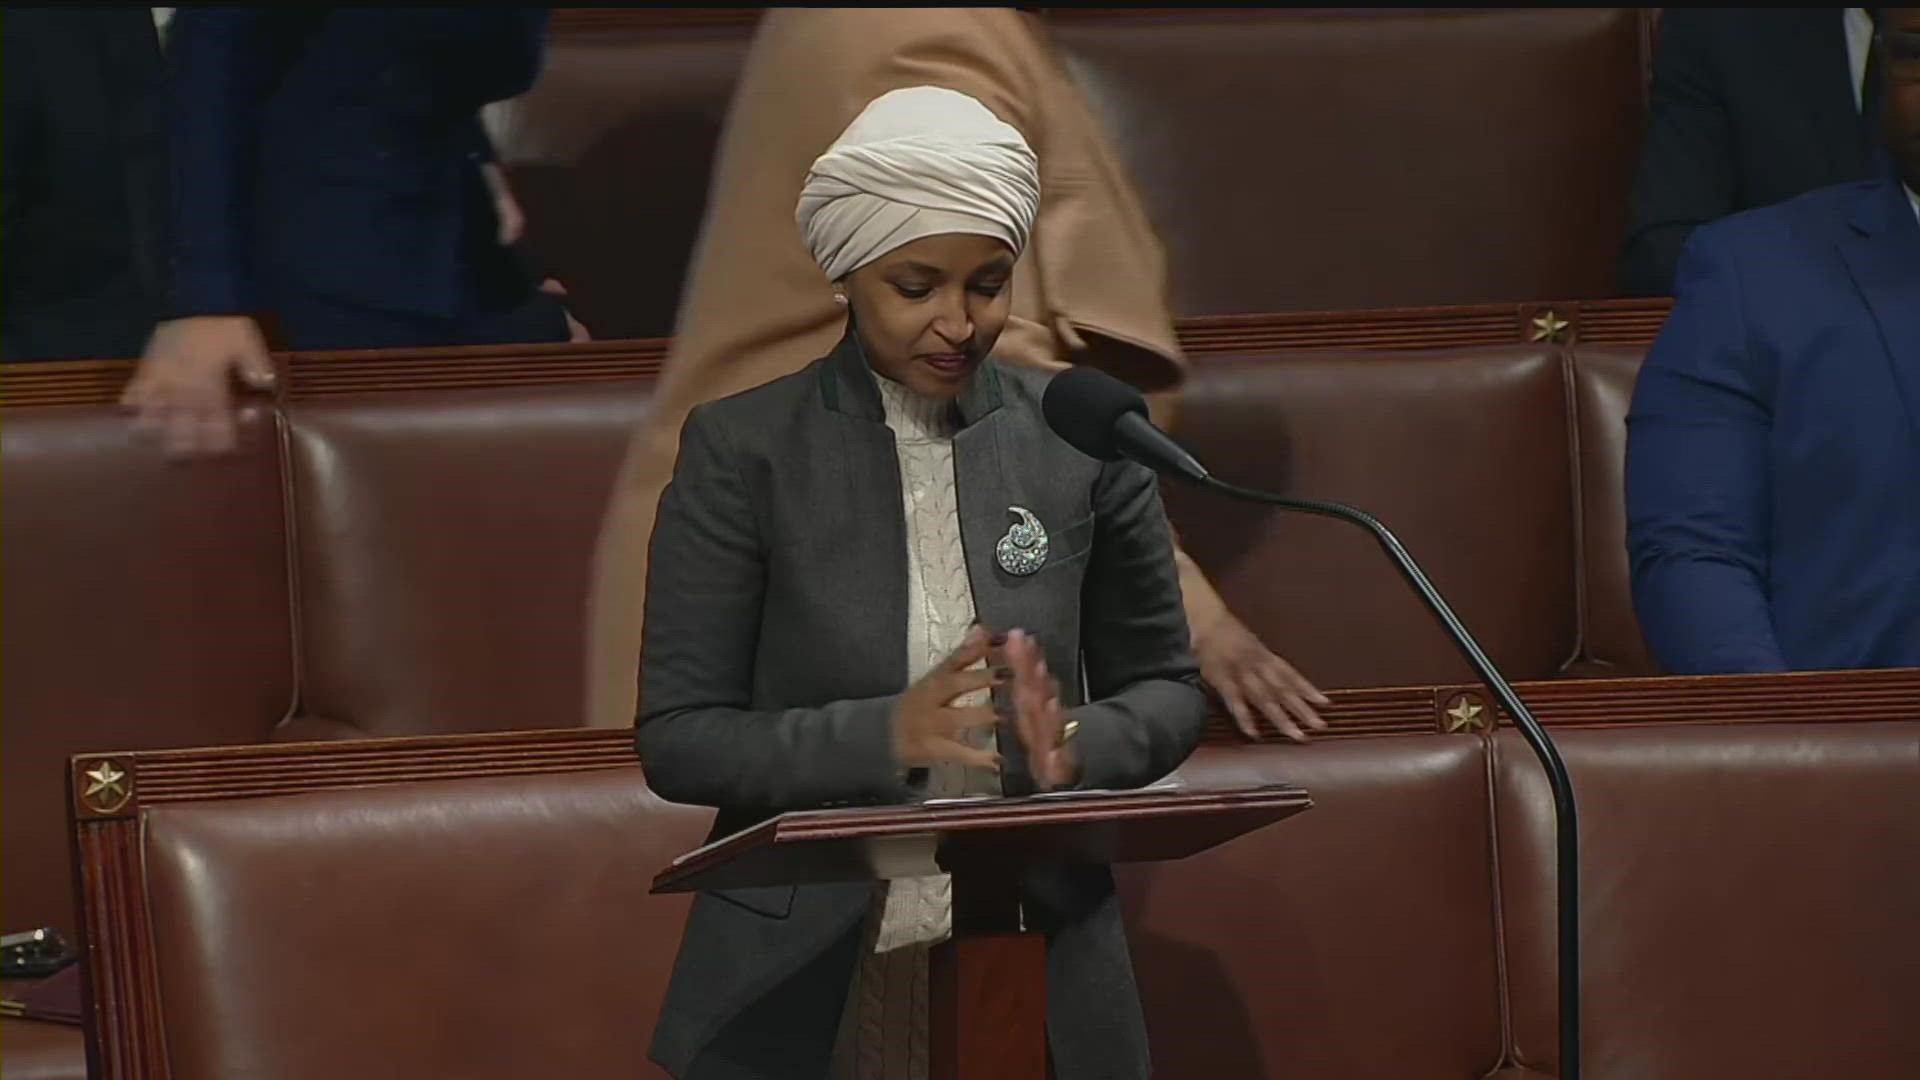 The vote to remove Rep. Ilhan Omar was along party lines and the debate showed how divided Democrats and Republicans are.